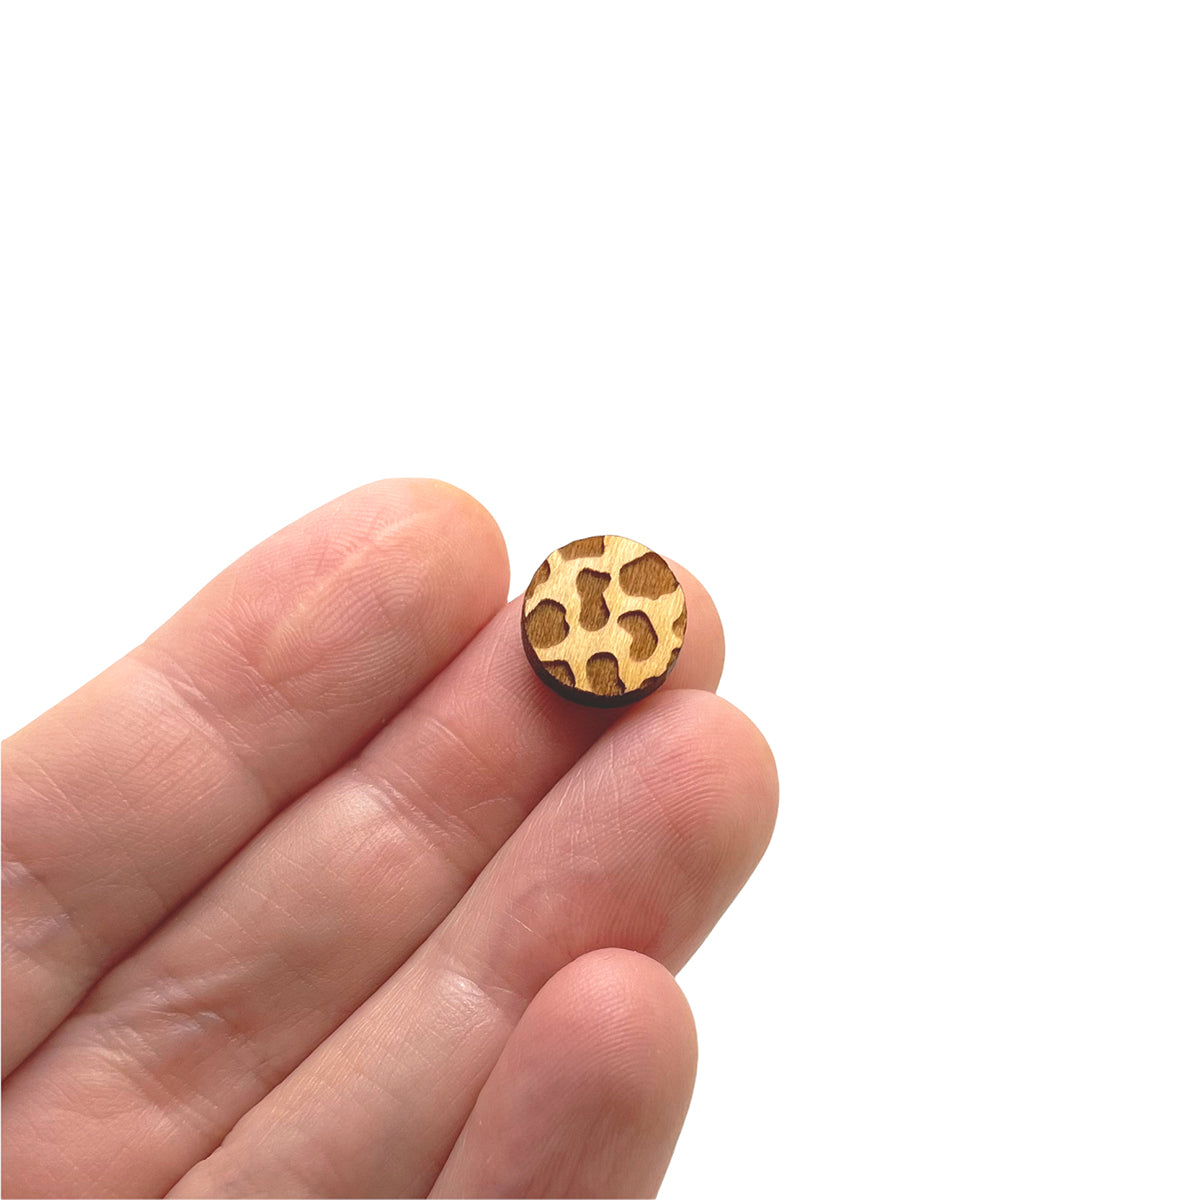 a hand holding a pair of round shaped wooden cabochon stud earring blanks engraved with cow print